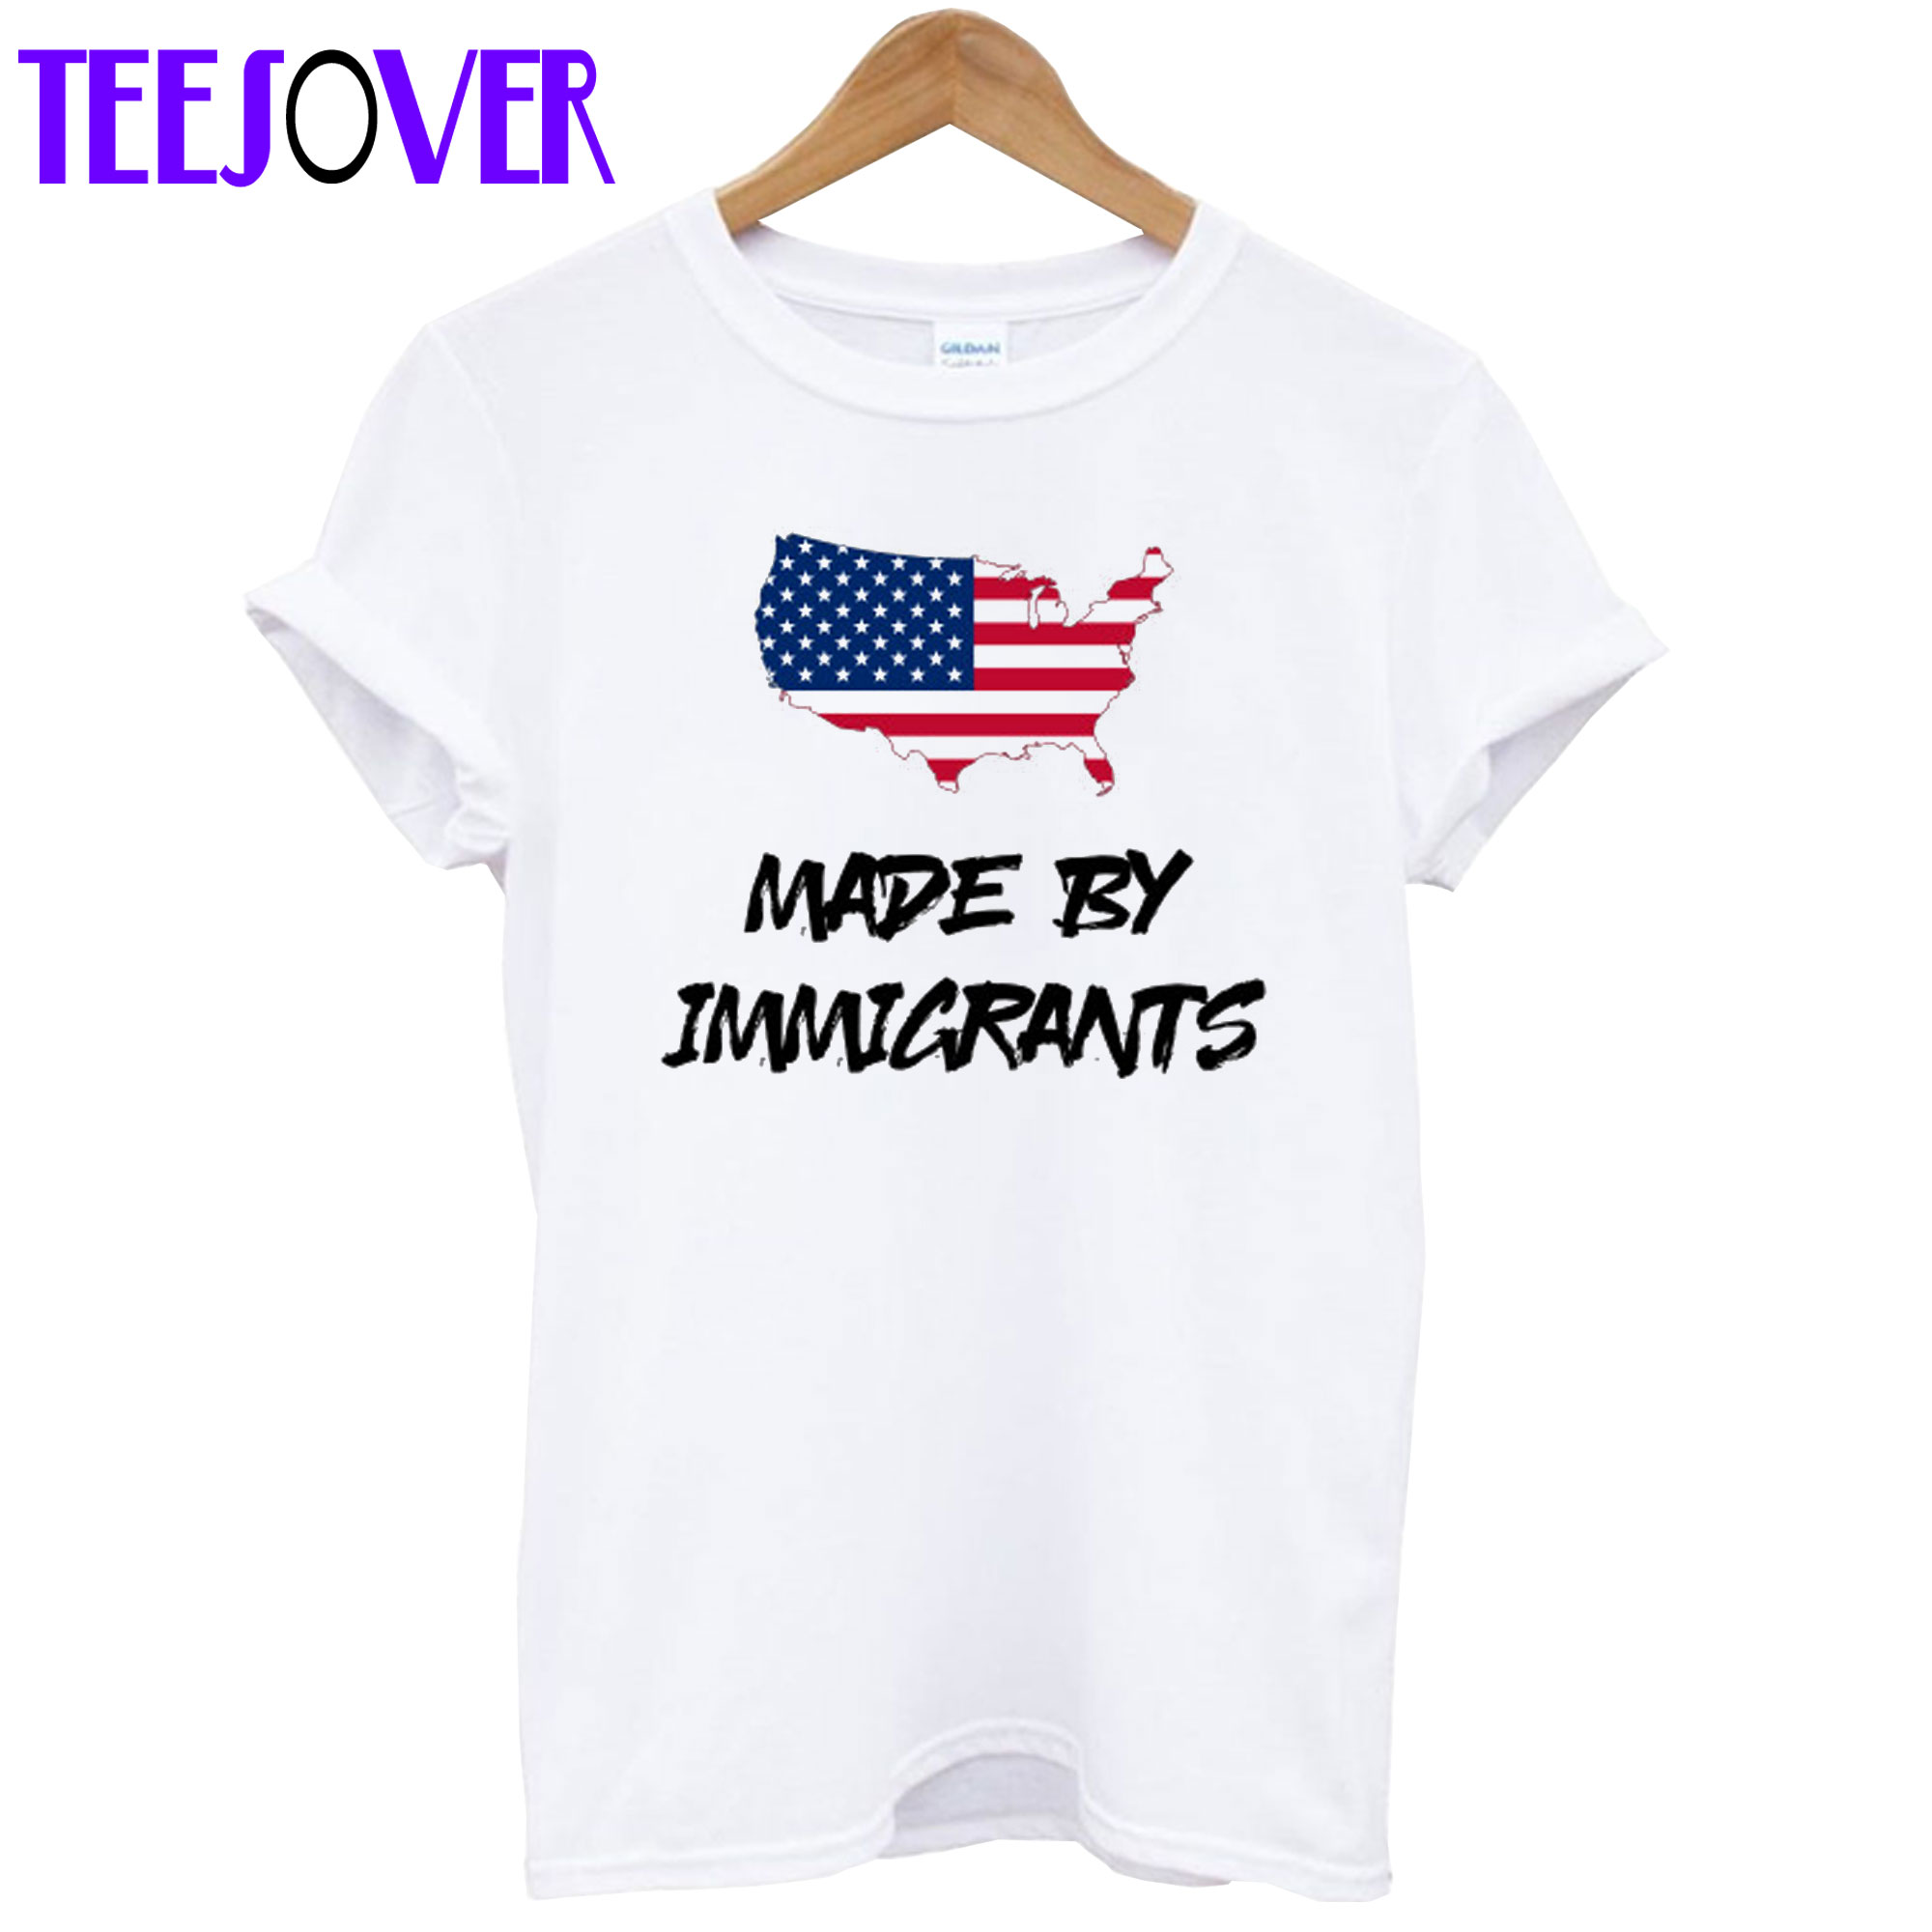 Made by Immigrants T Shirt